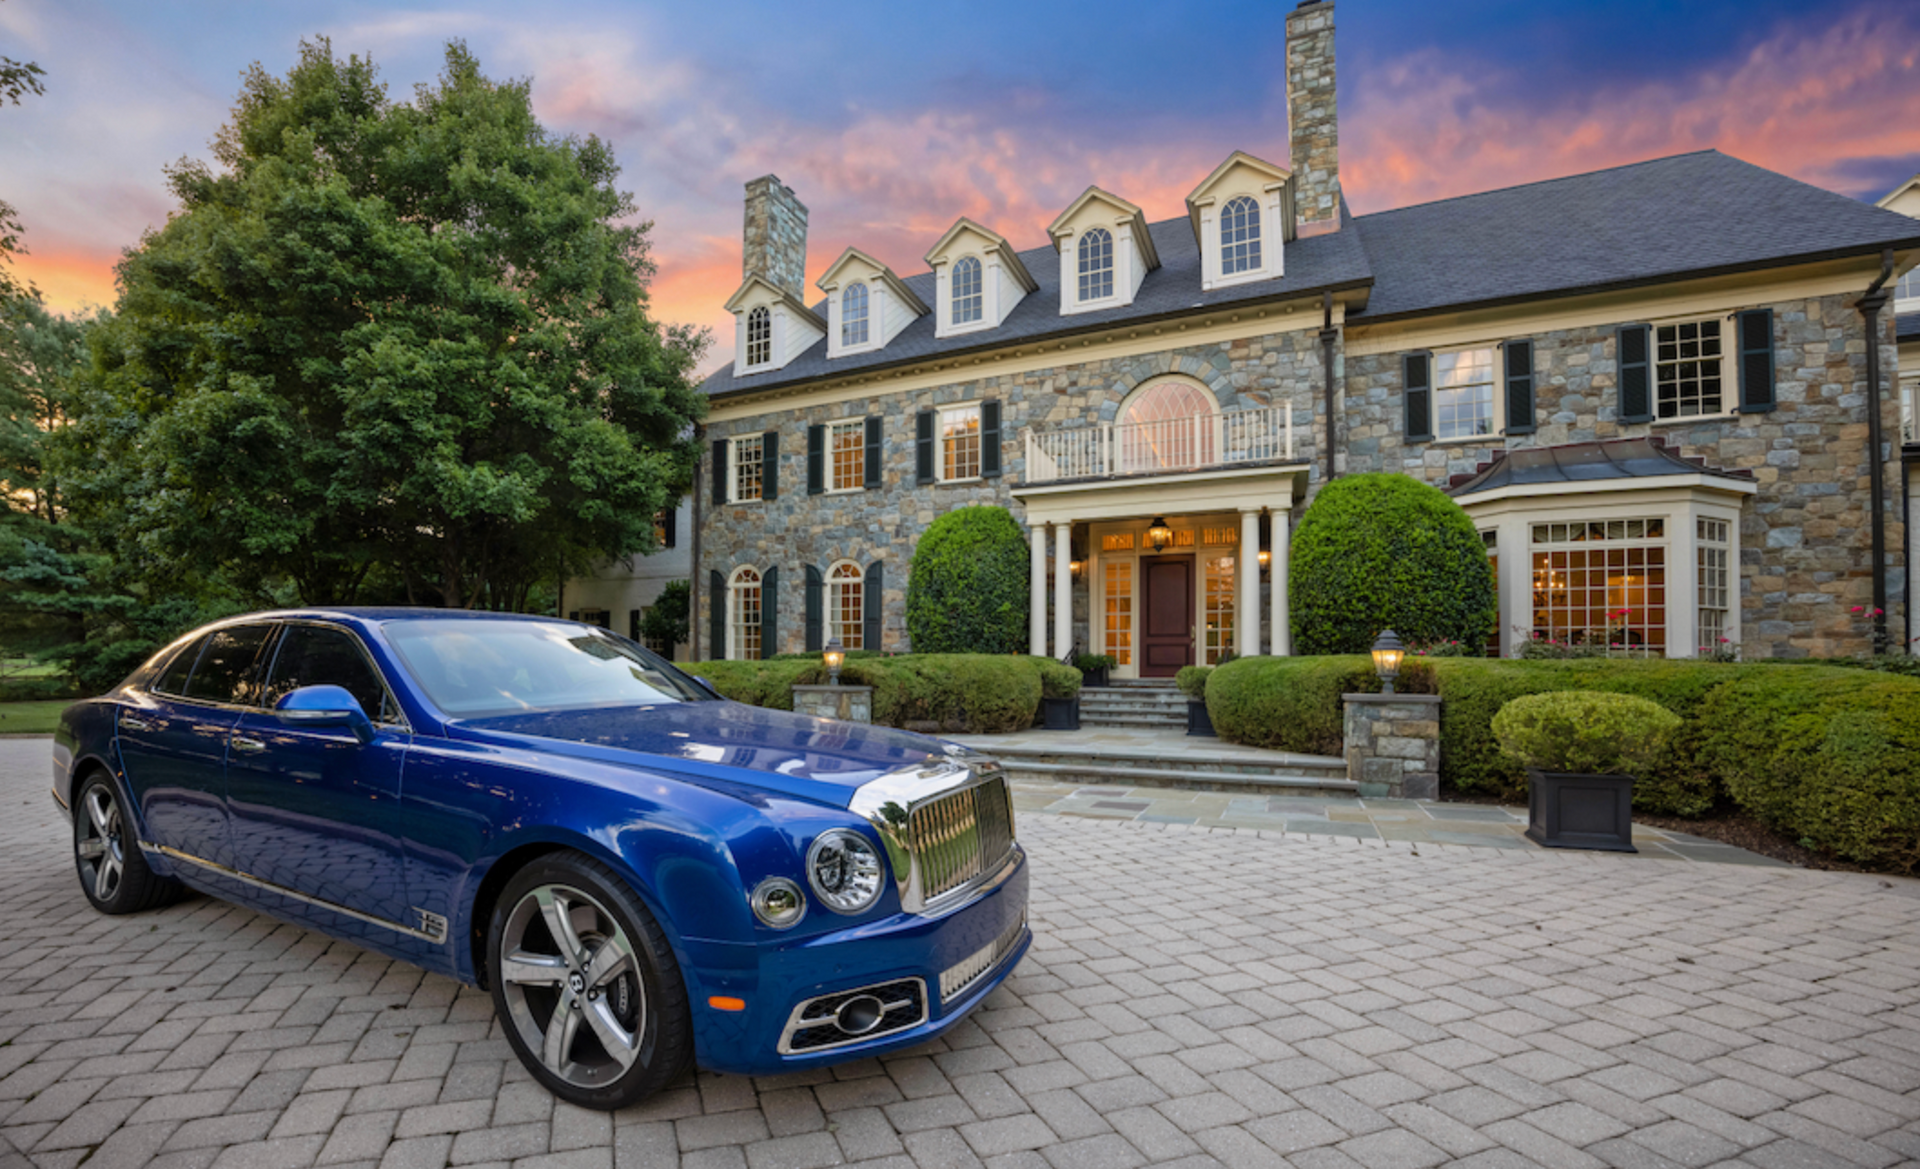 a blue luxury car is parked in front of a large stone house. photo by craig westerman